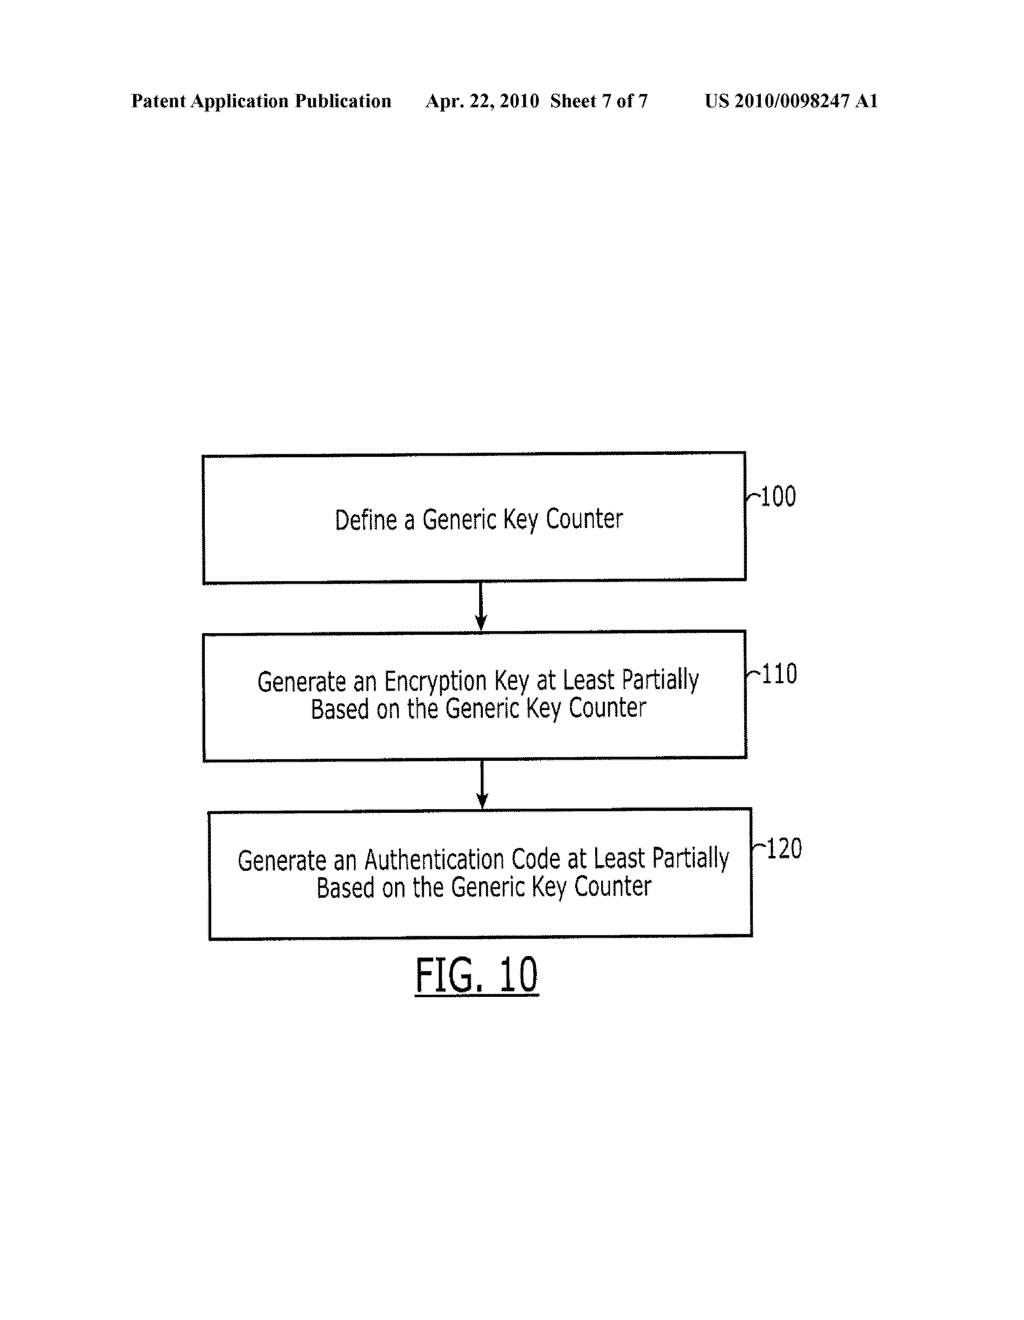 Method, Apparatus And Computer Program Product For Generating An Encryption Key And An Authentication Code Key Utilizing A Generic Key Counter - diagram, schematic, and image 08